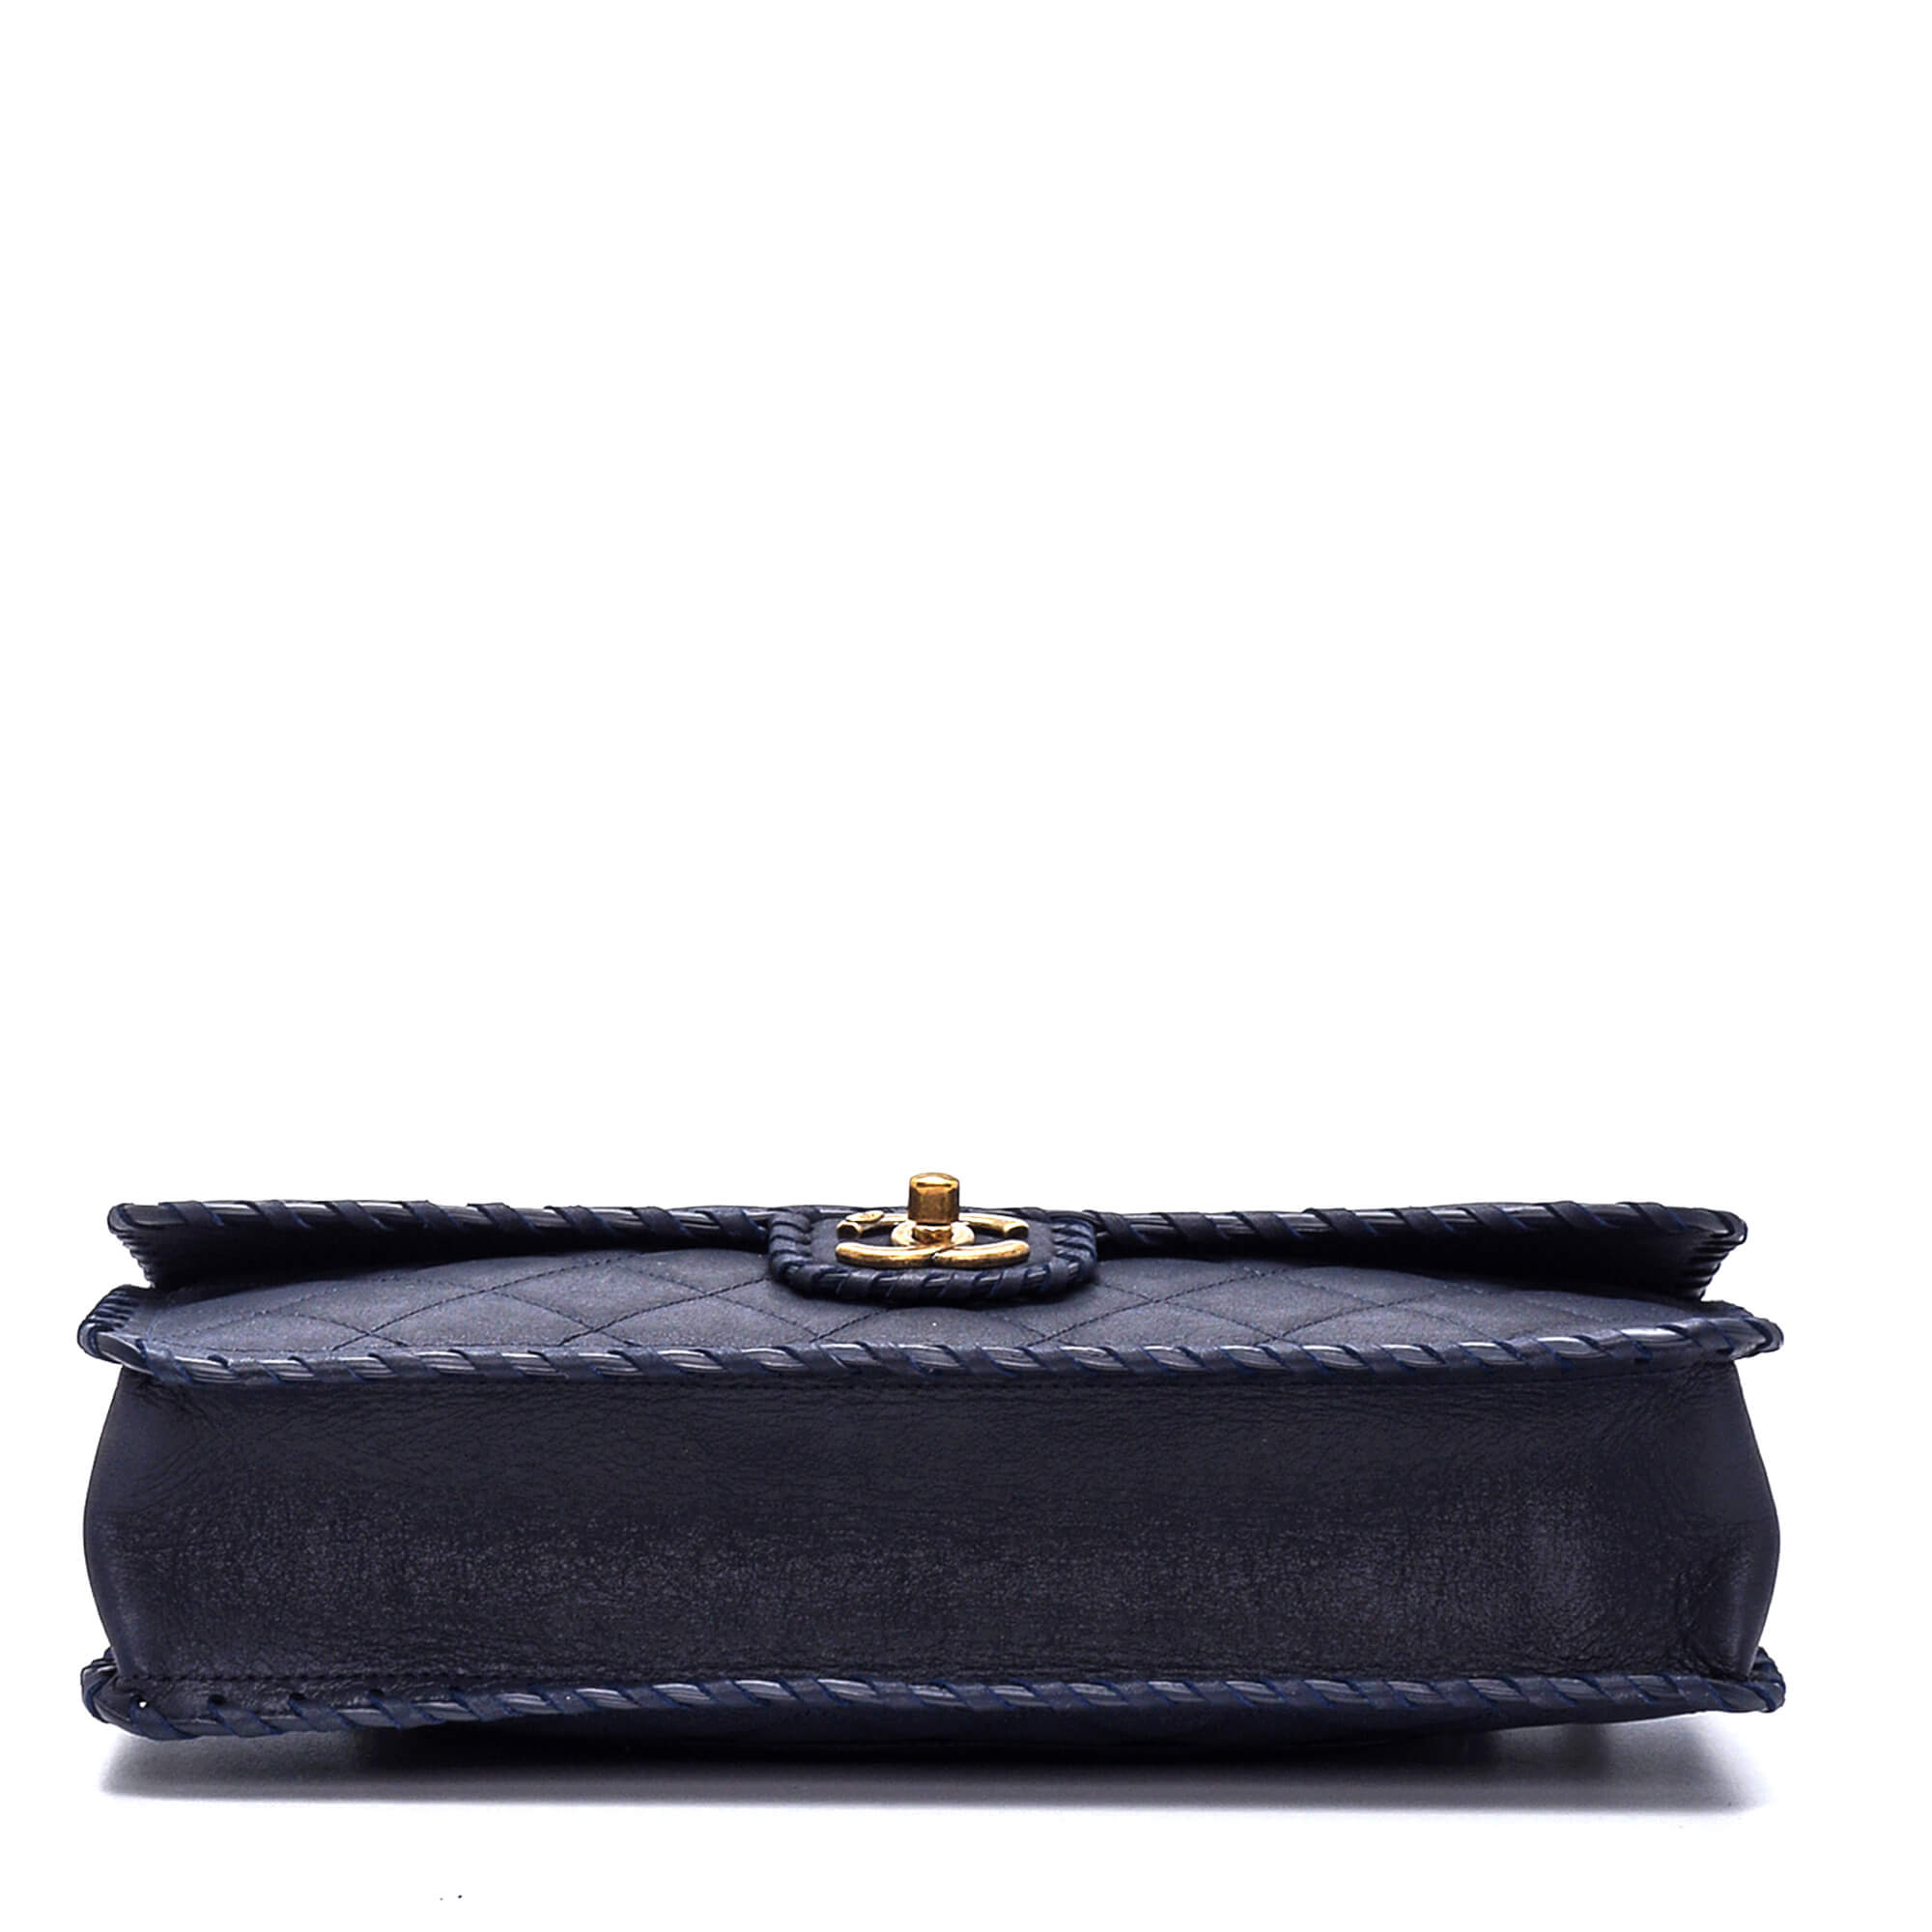 Chanel - Navy Blue Quilted Calfskin Leather 2015 Jumbo Happy Stitch Flap Bag